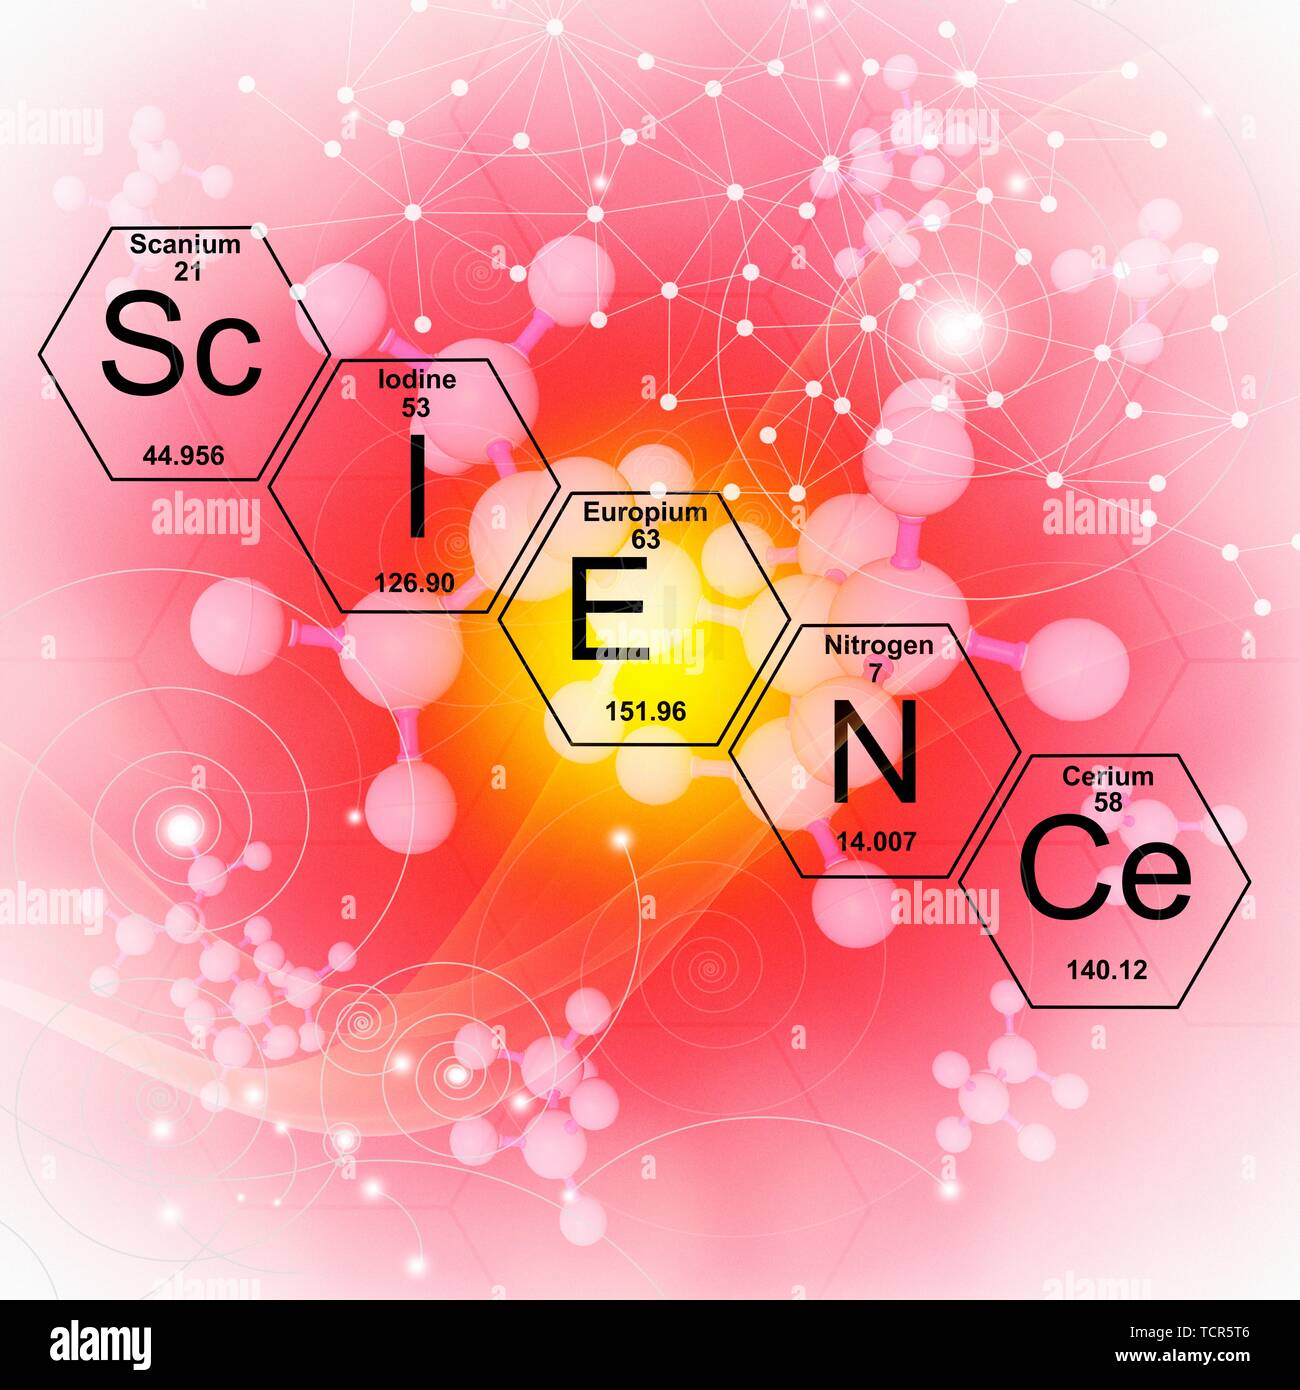 Chemical elements science, illustration Stock Photo